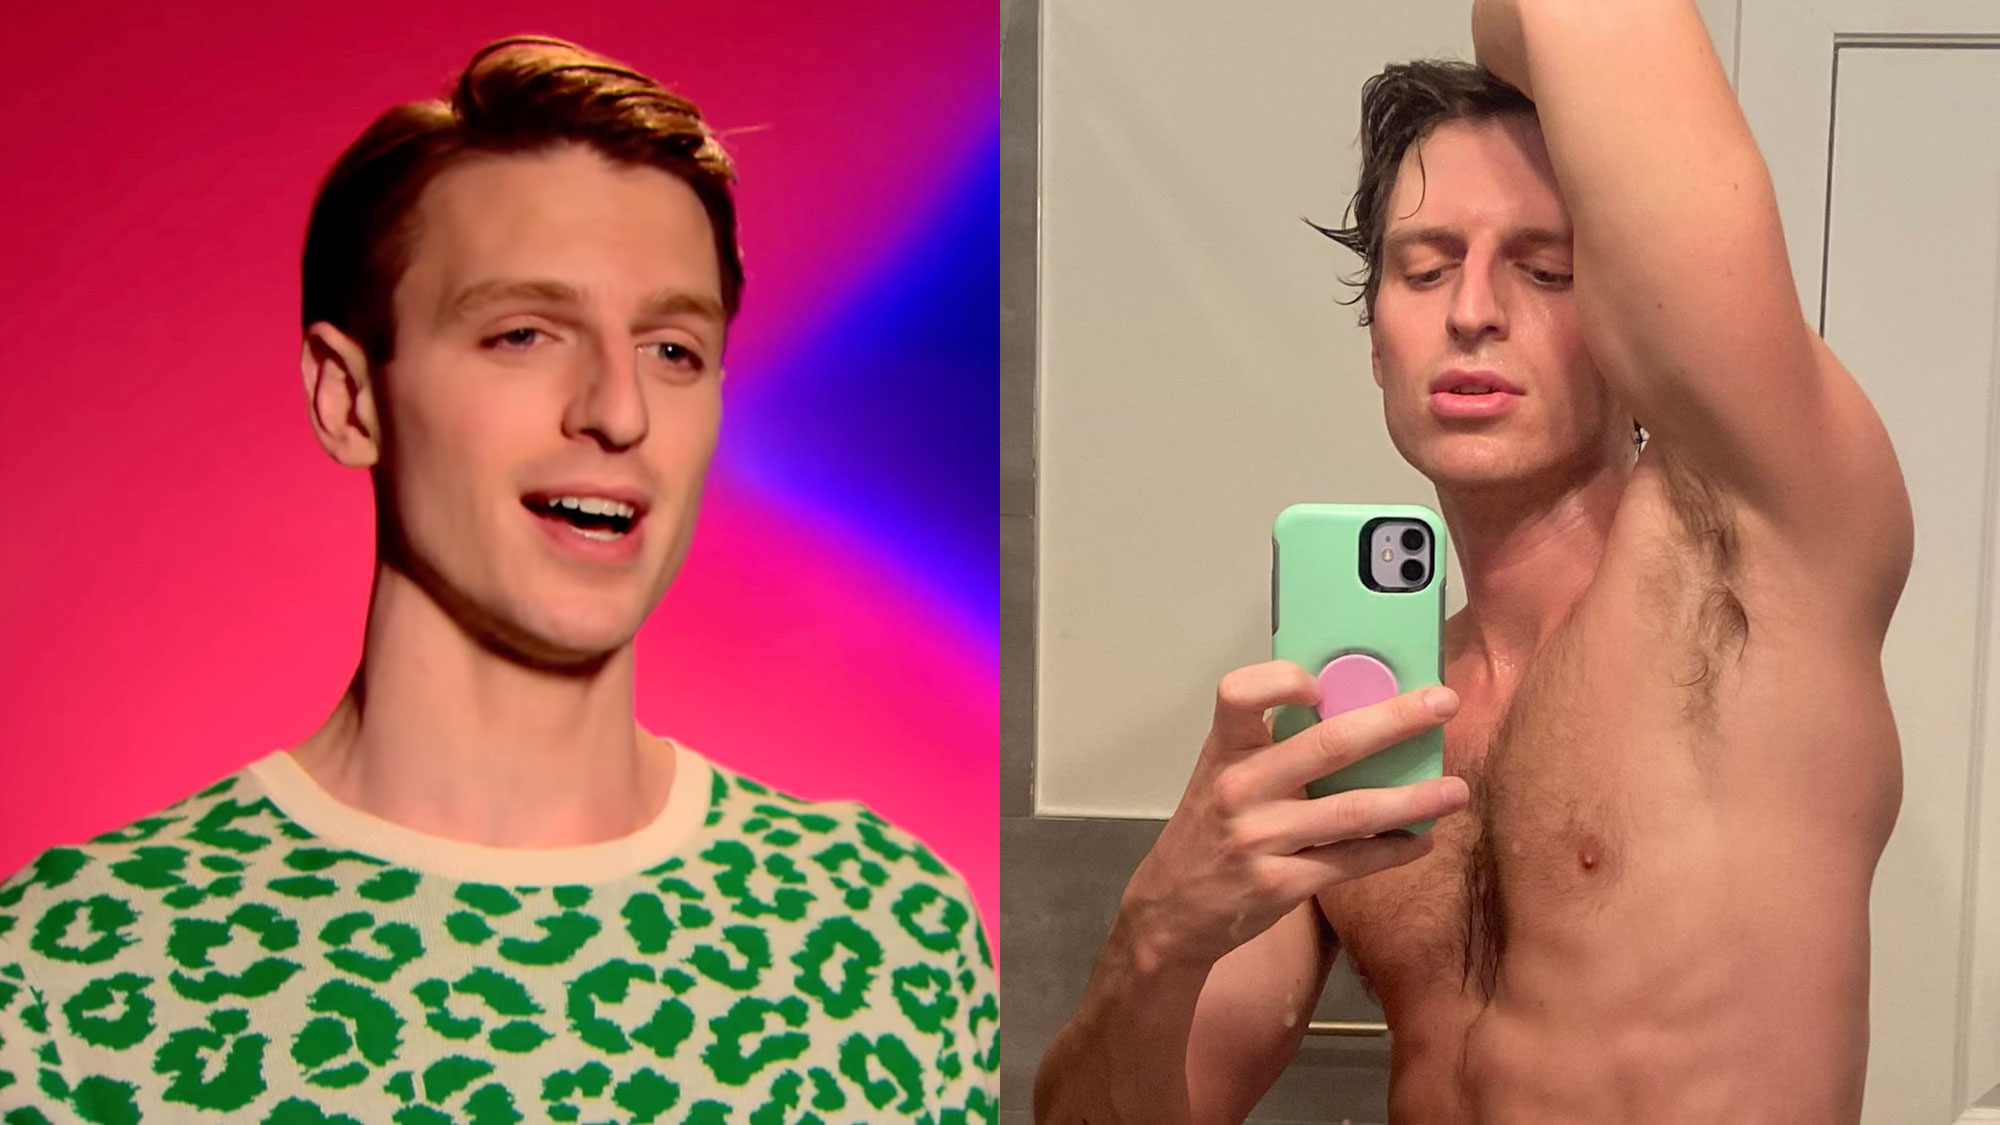 WATCH: 'Drag Race' Star Milk Busts Long Rope In Cum Shot Vid - TheSword.com